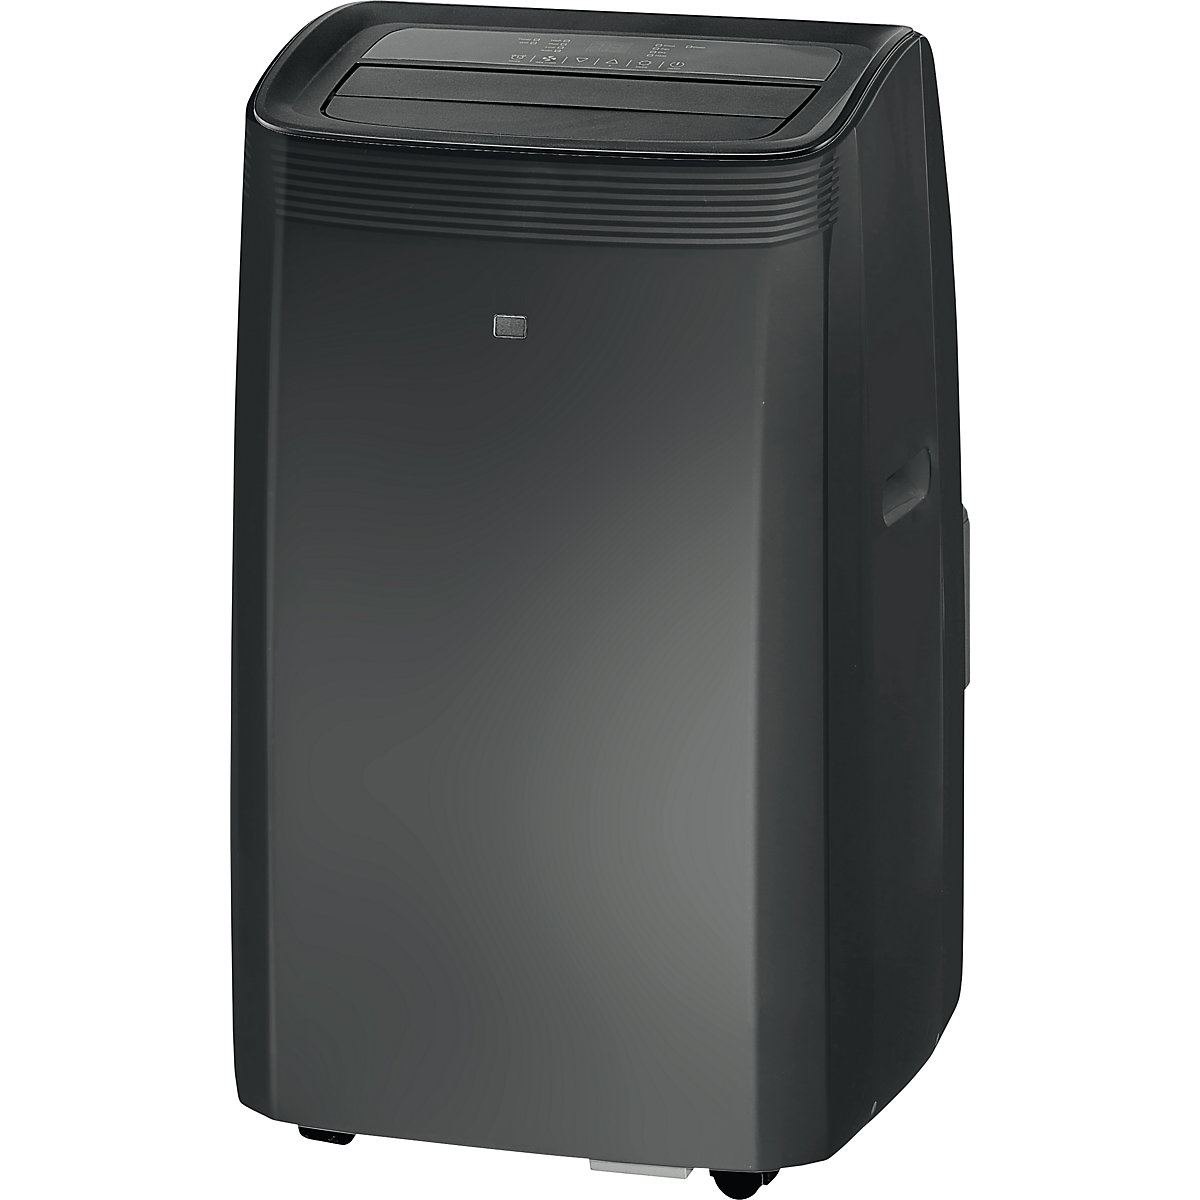 9000 BTU mobile air conditioner – TCL, 2.6 kW, A++, 3-in-1 unit, black-3